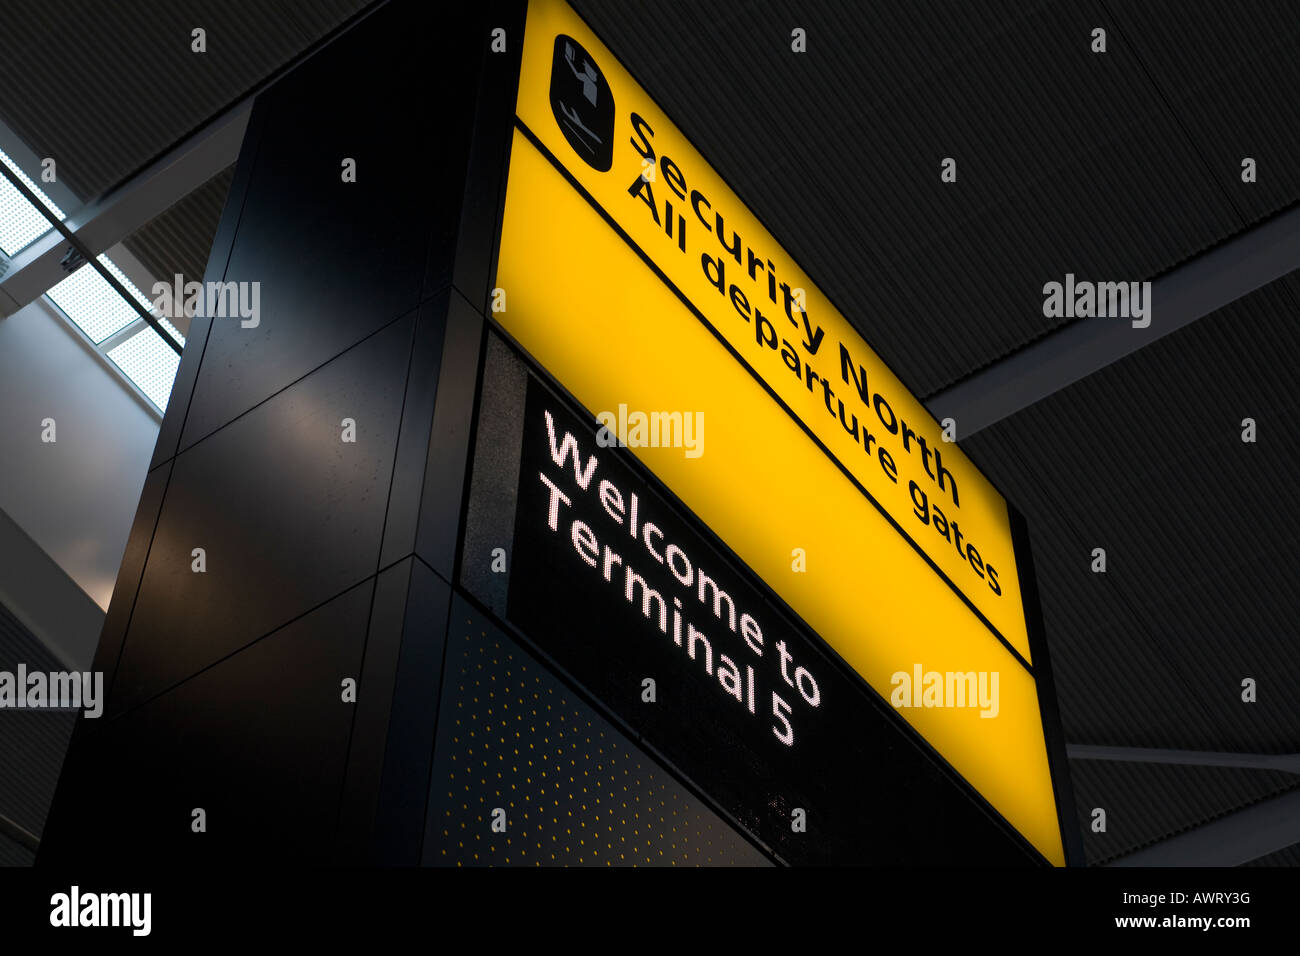 Security and welcome notice sign at London Heathrow Airport Terminal 5 Stock Photo